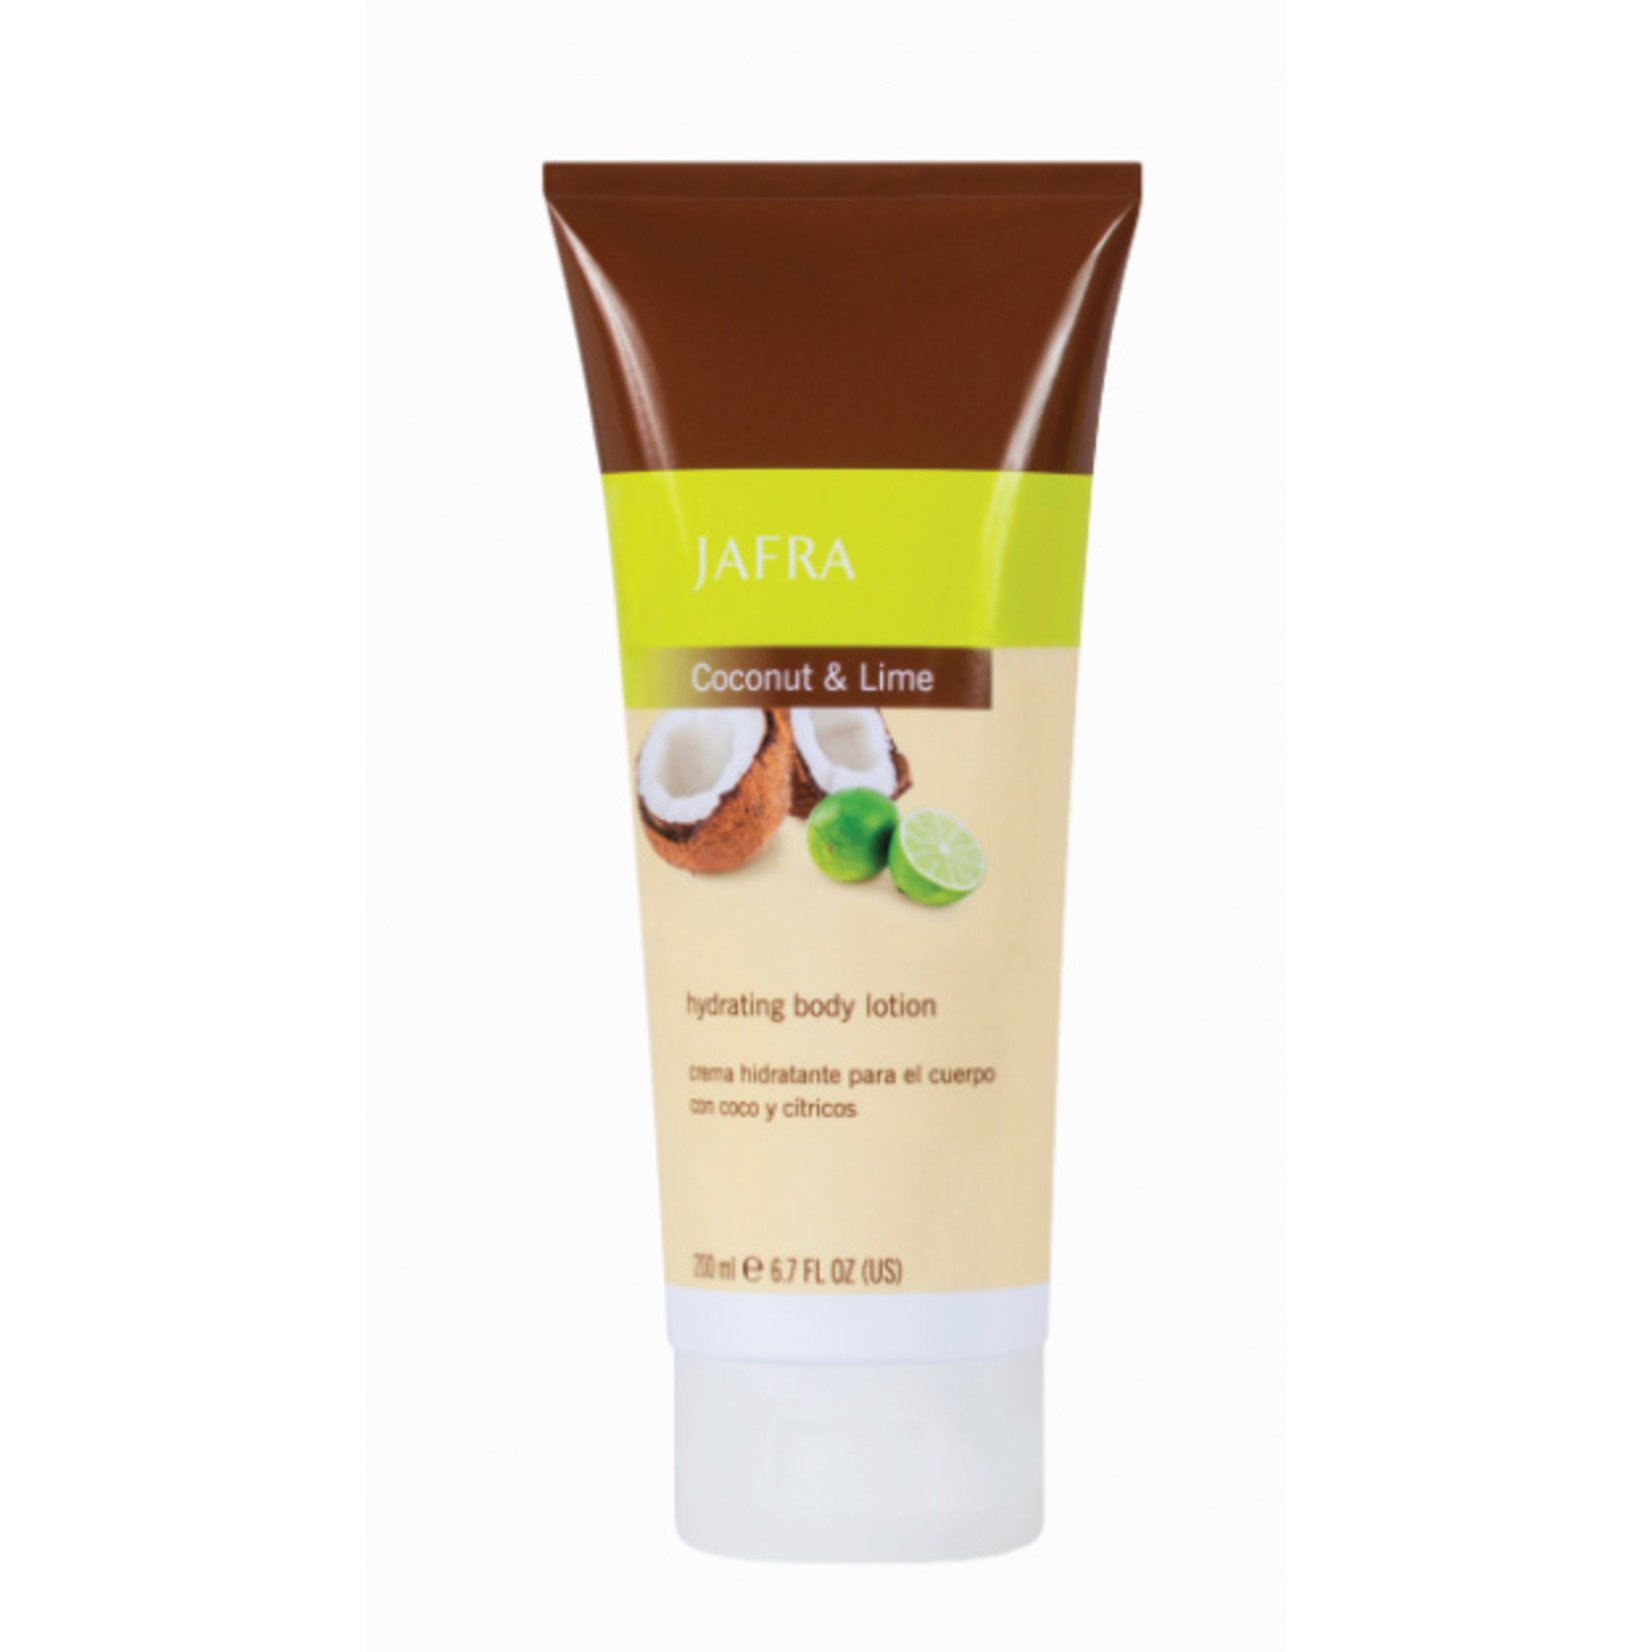 Jafra Coconut & Lime Hydrating Body Lotion